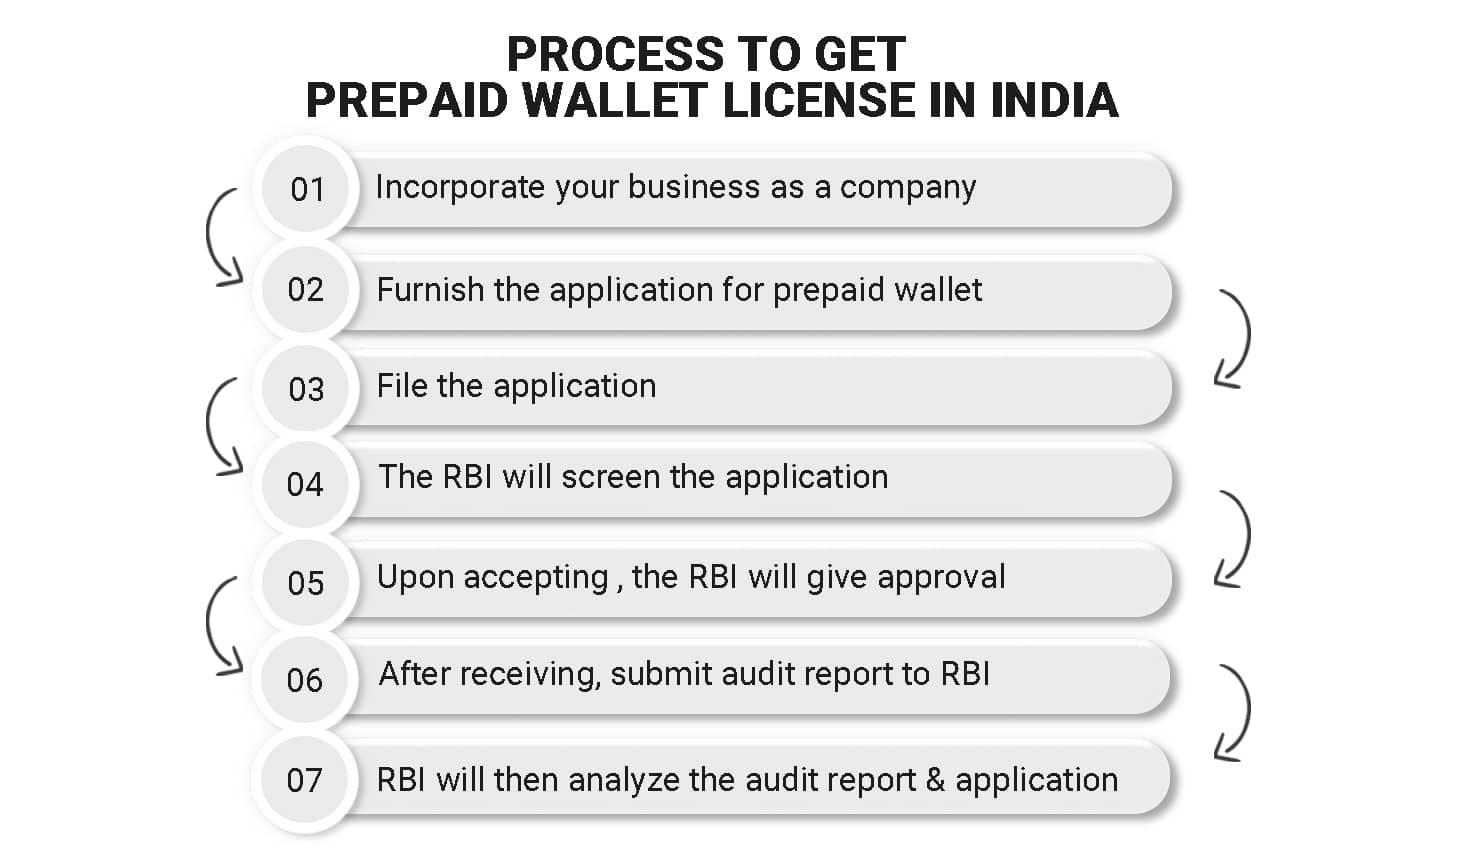 Process to get Prepaid Wallet License in India